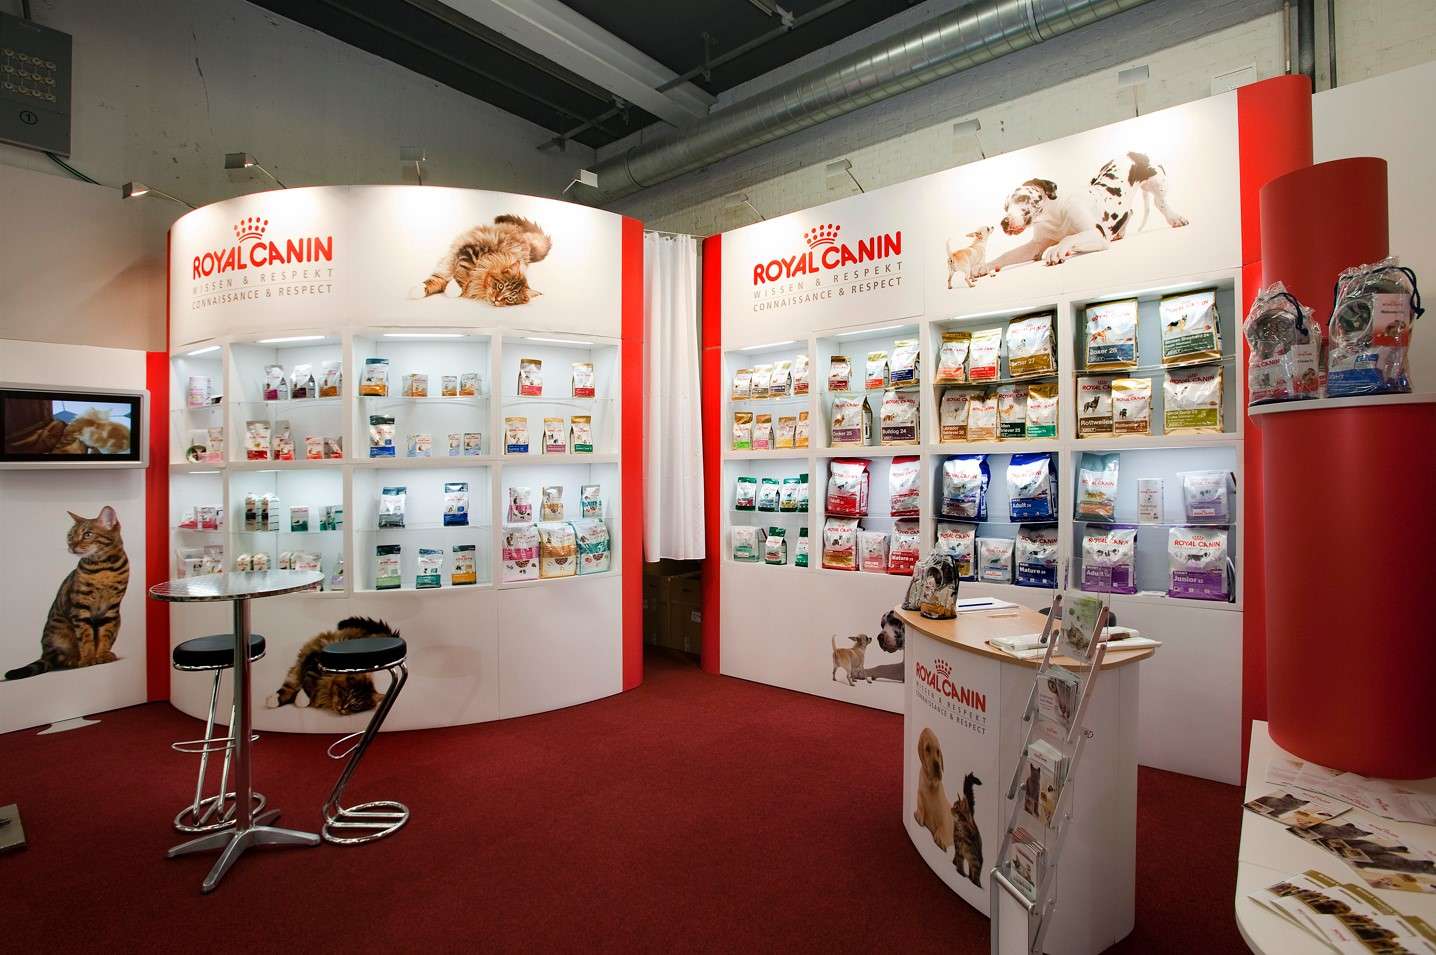 Royal Canin Messestand